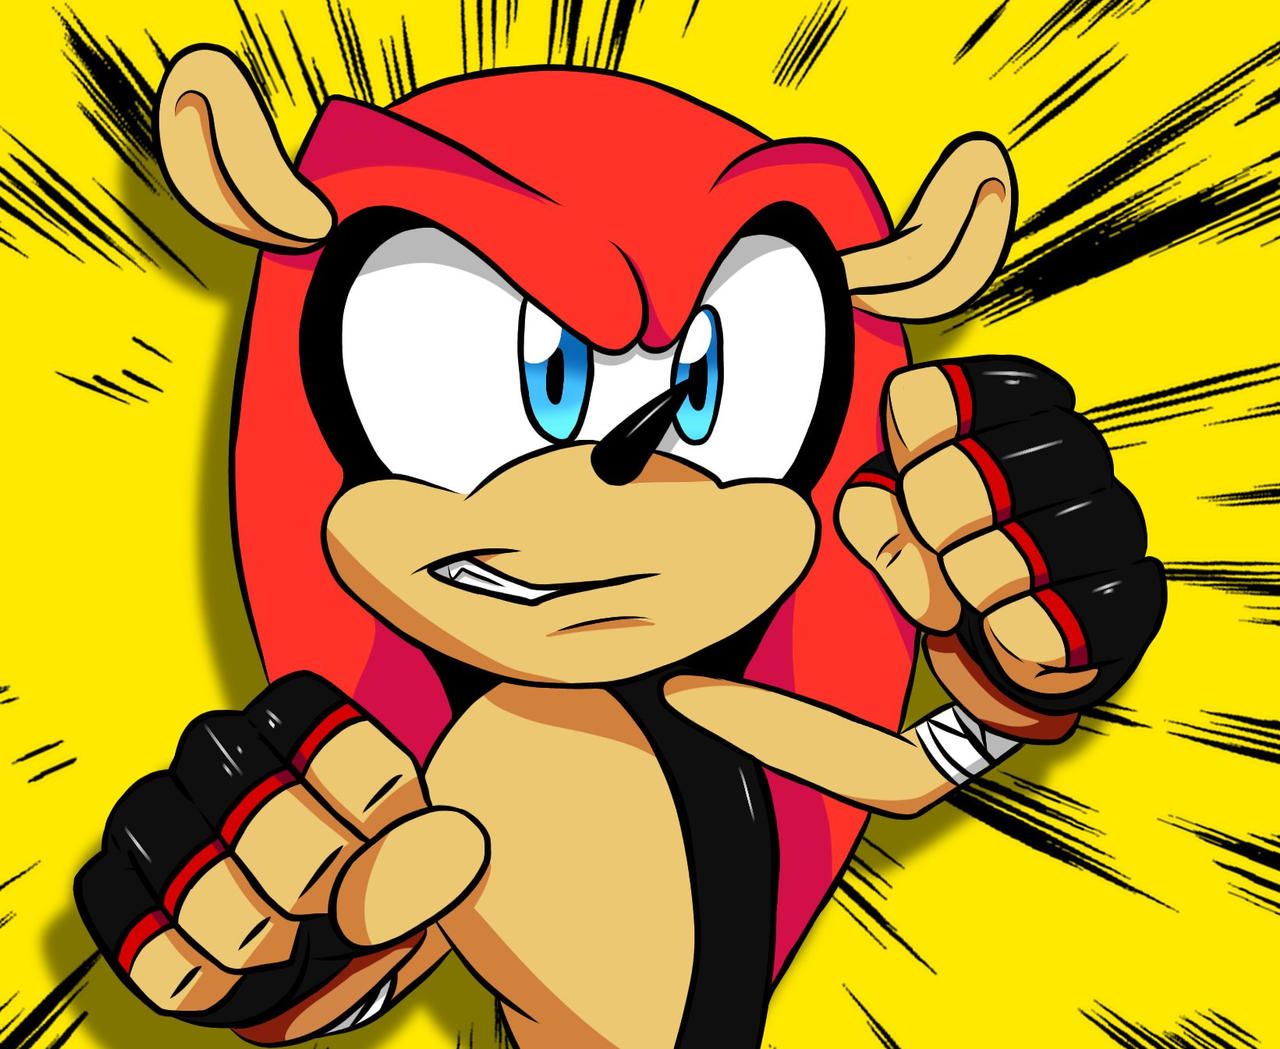 Mighty the armadillo by TheRazzleDazzle14 on DeviantArt